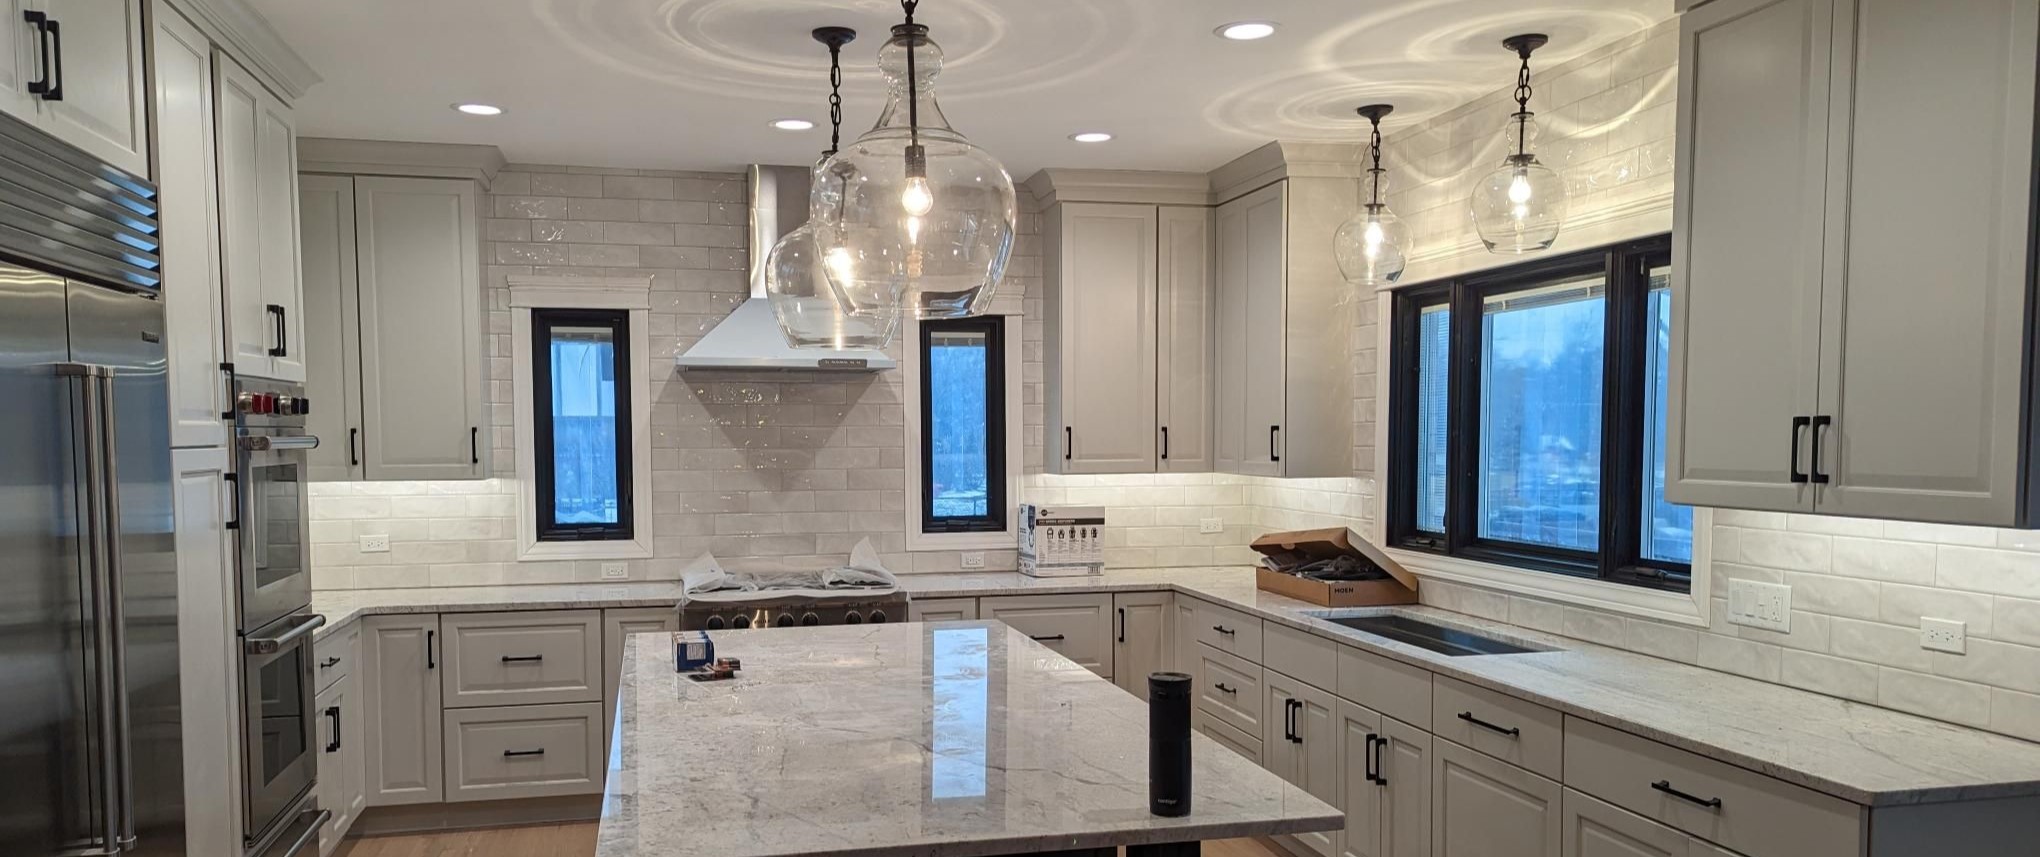 Cabinet lighting in a kitchen